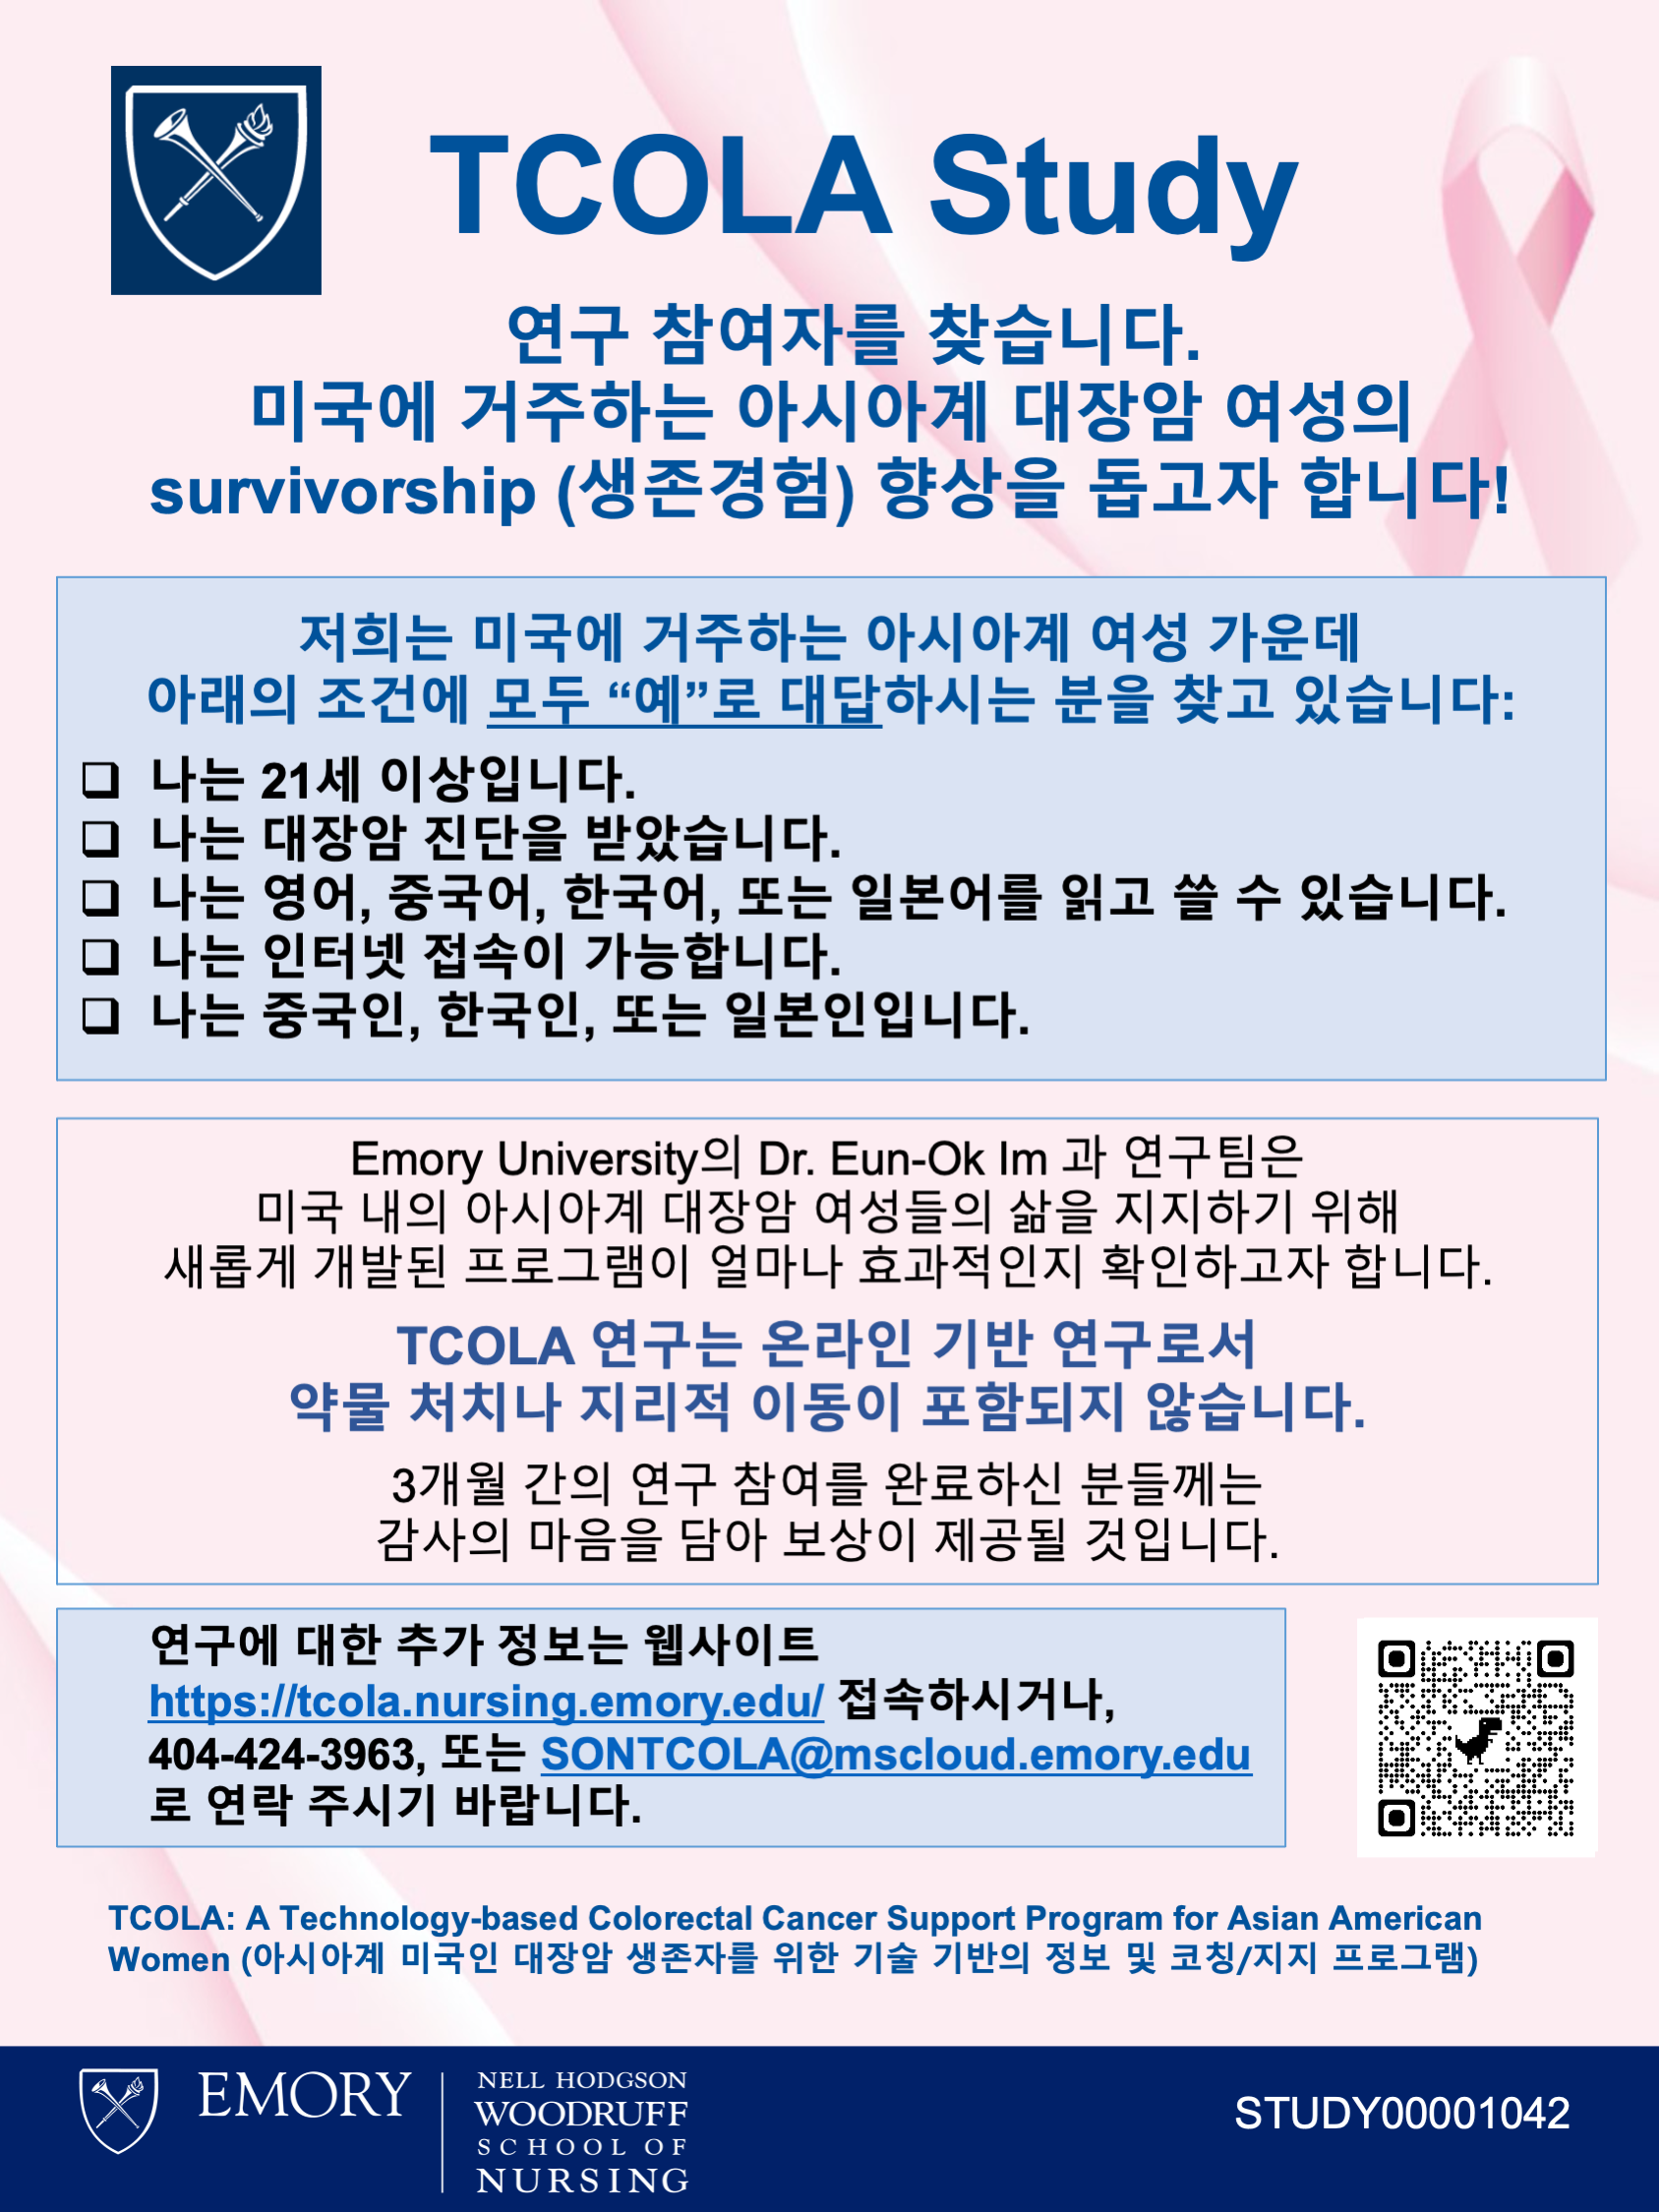 mb-file.php?path=2022%2F04%2F23%2FF336_TCOLA%20Study%20Flyer_Korean.png